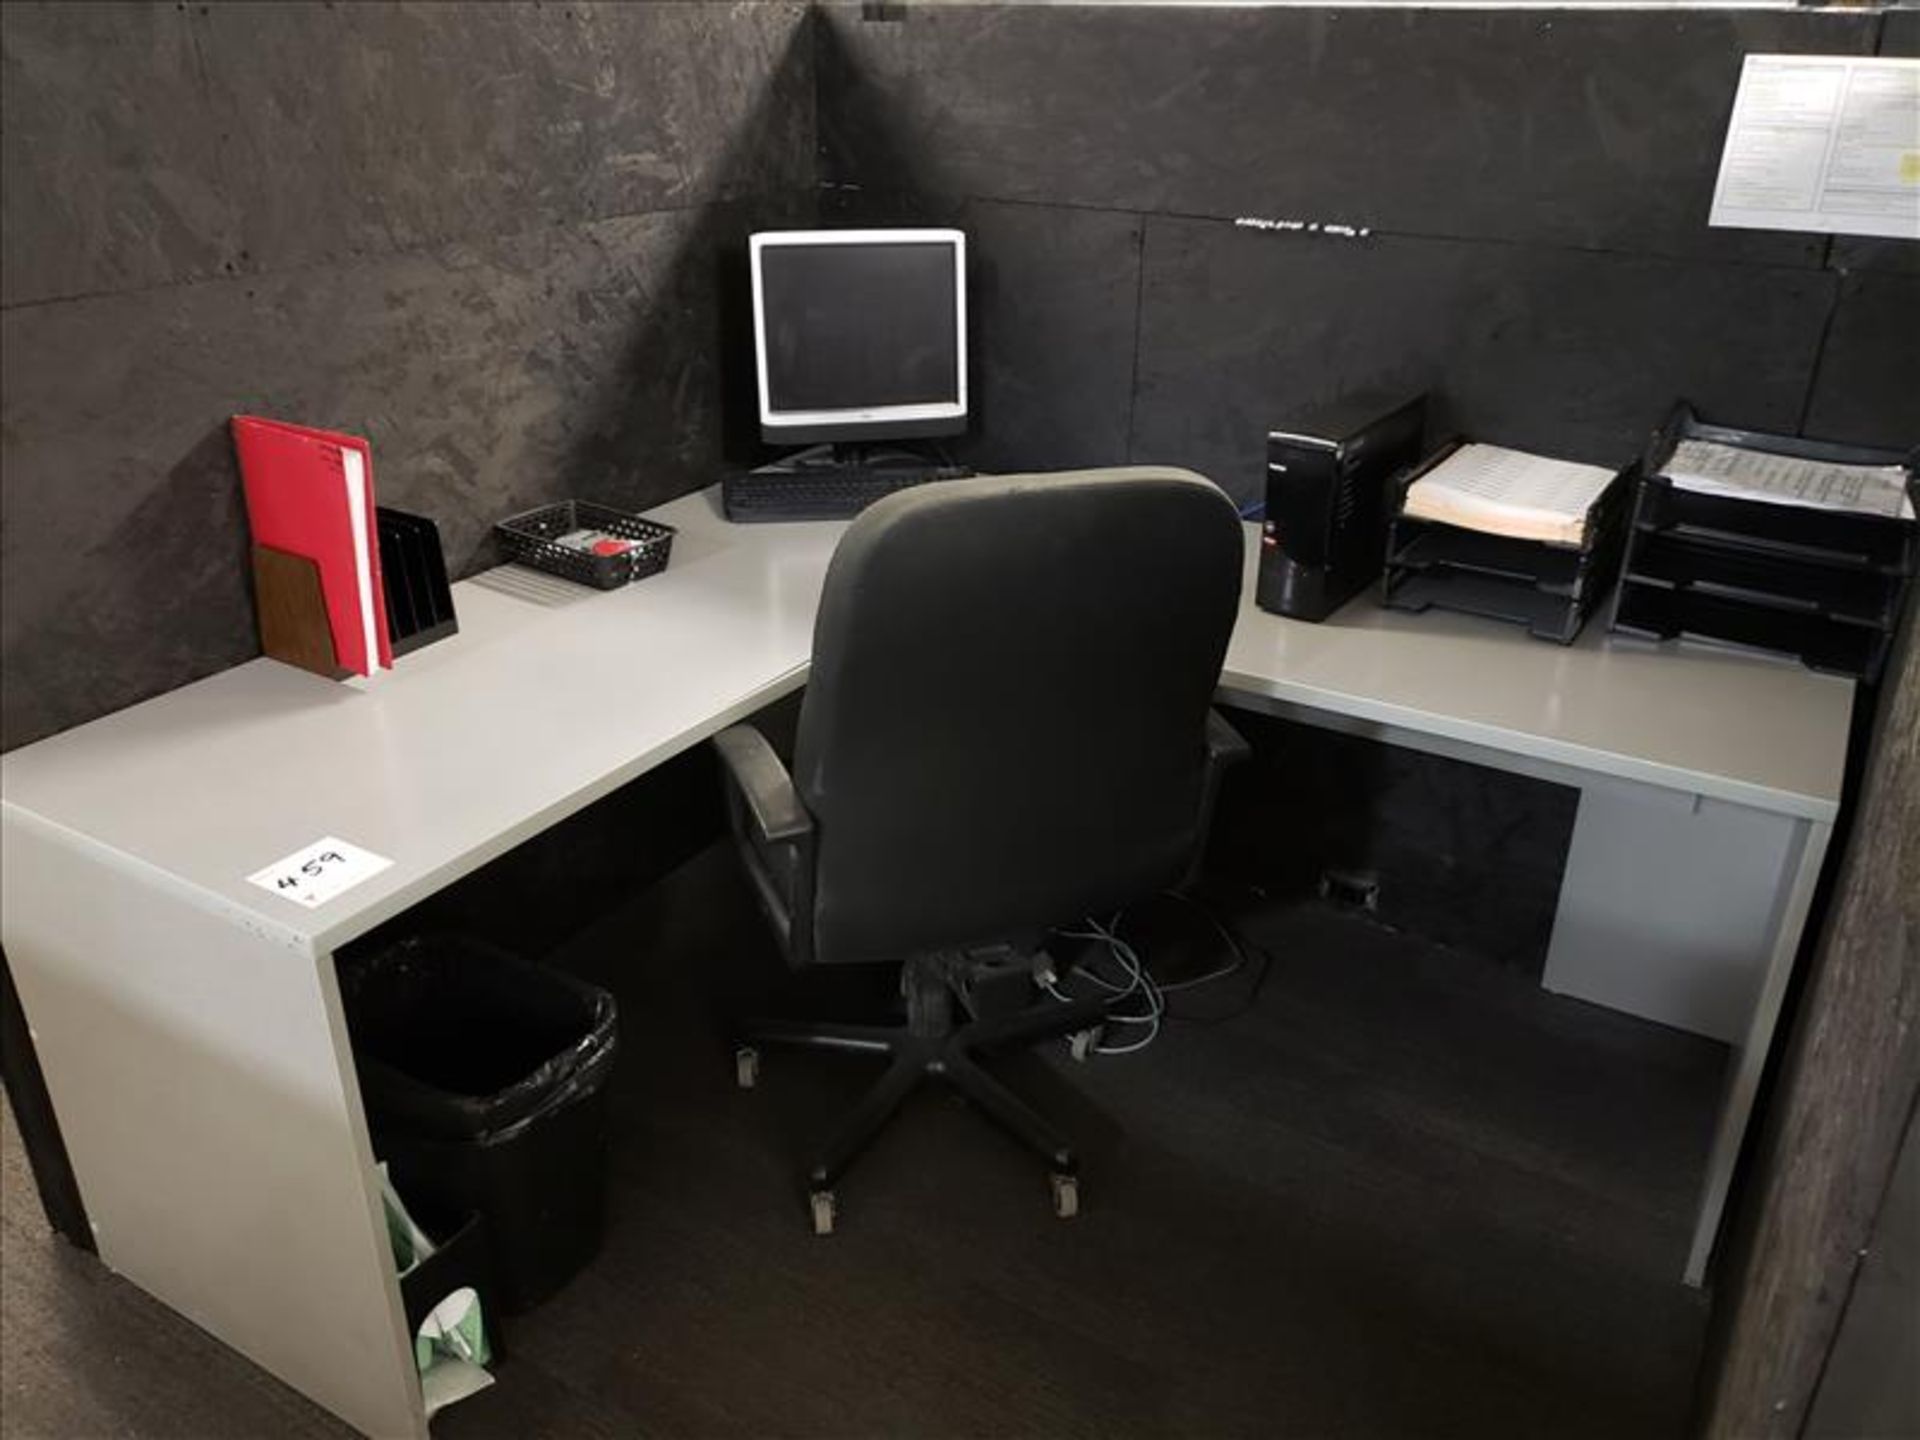 office furniture only (electronics, telecom, etc. excluded)